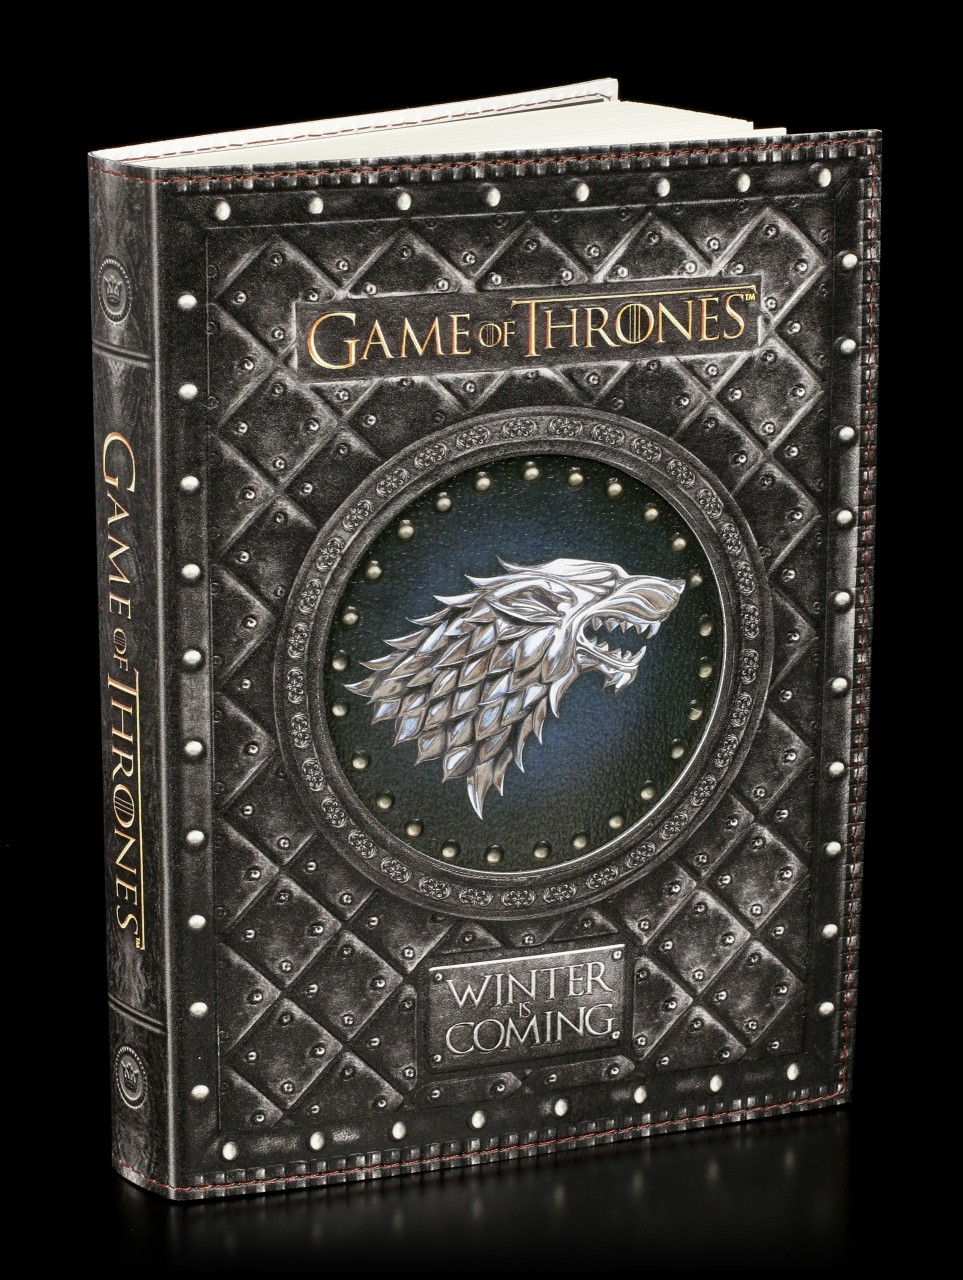 Game of Thrones Notizbuch - Winter is Coming